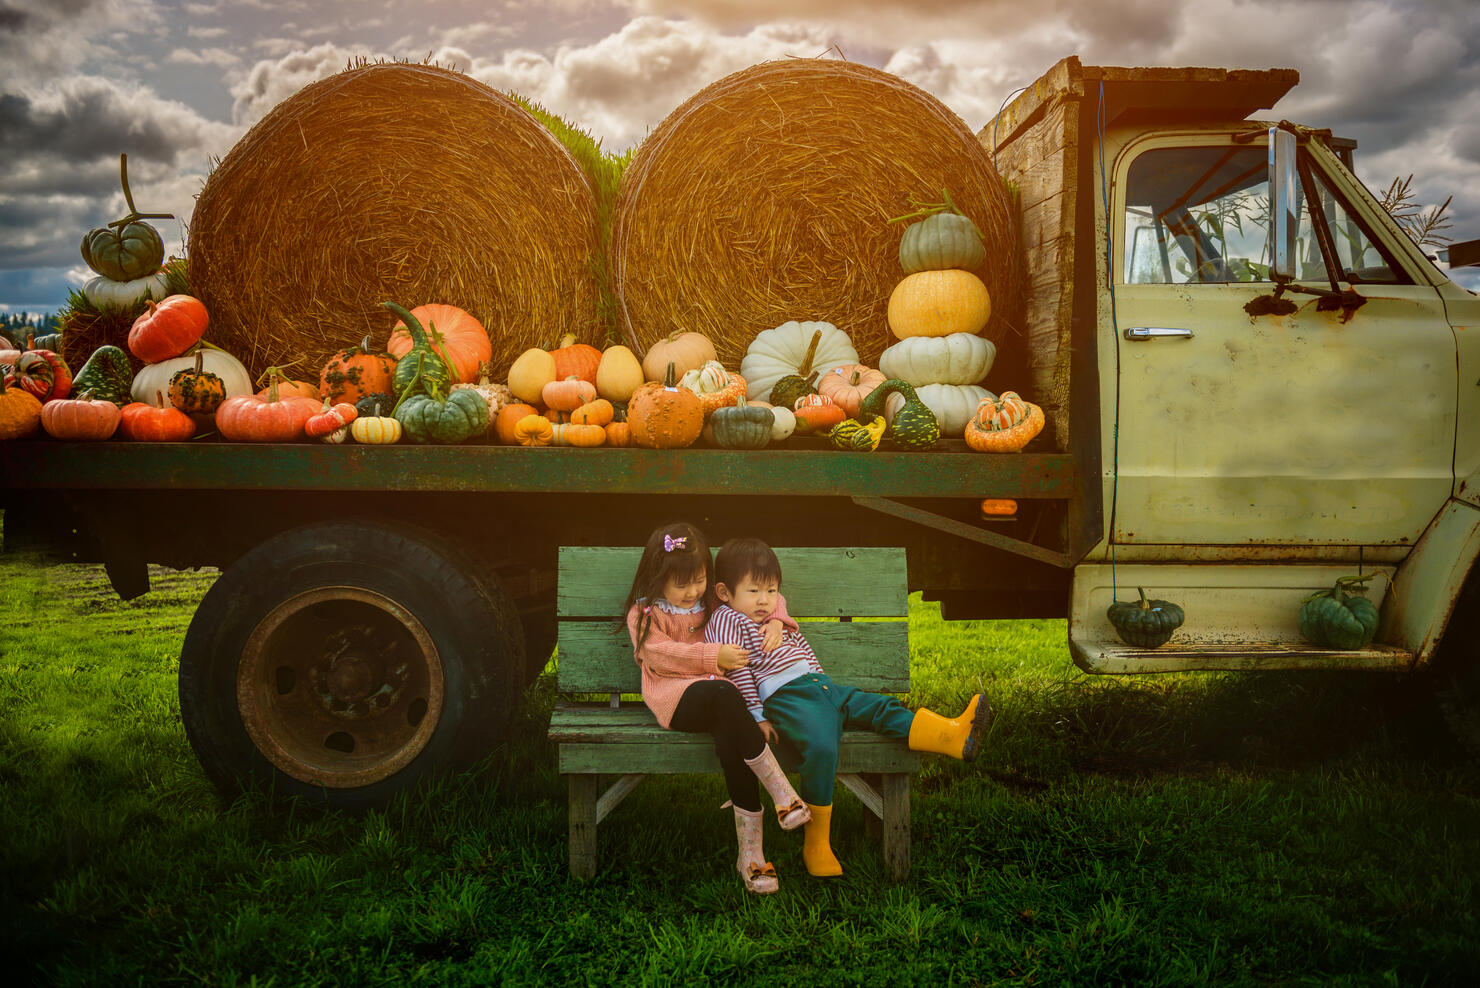 Siblings siting on the bench in front of tractor at pumpkin patch.